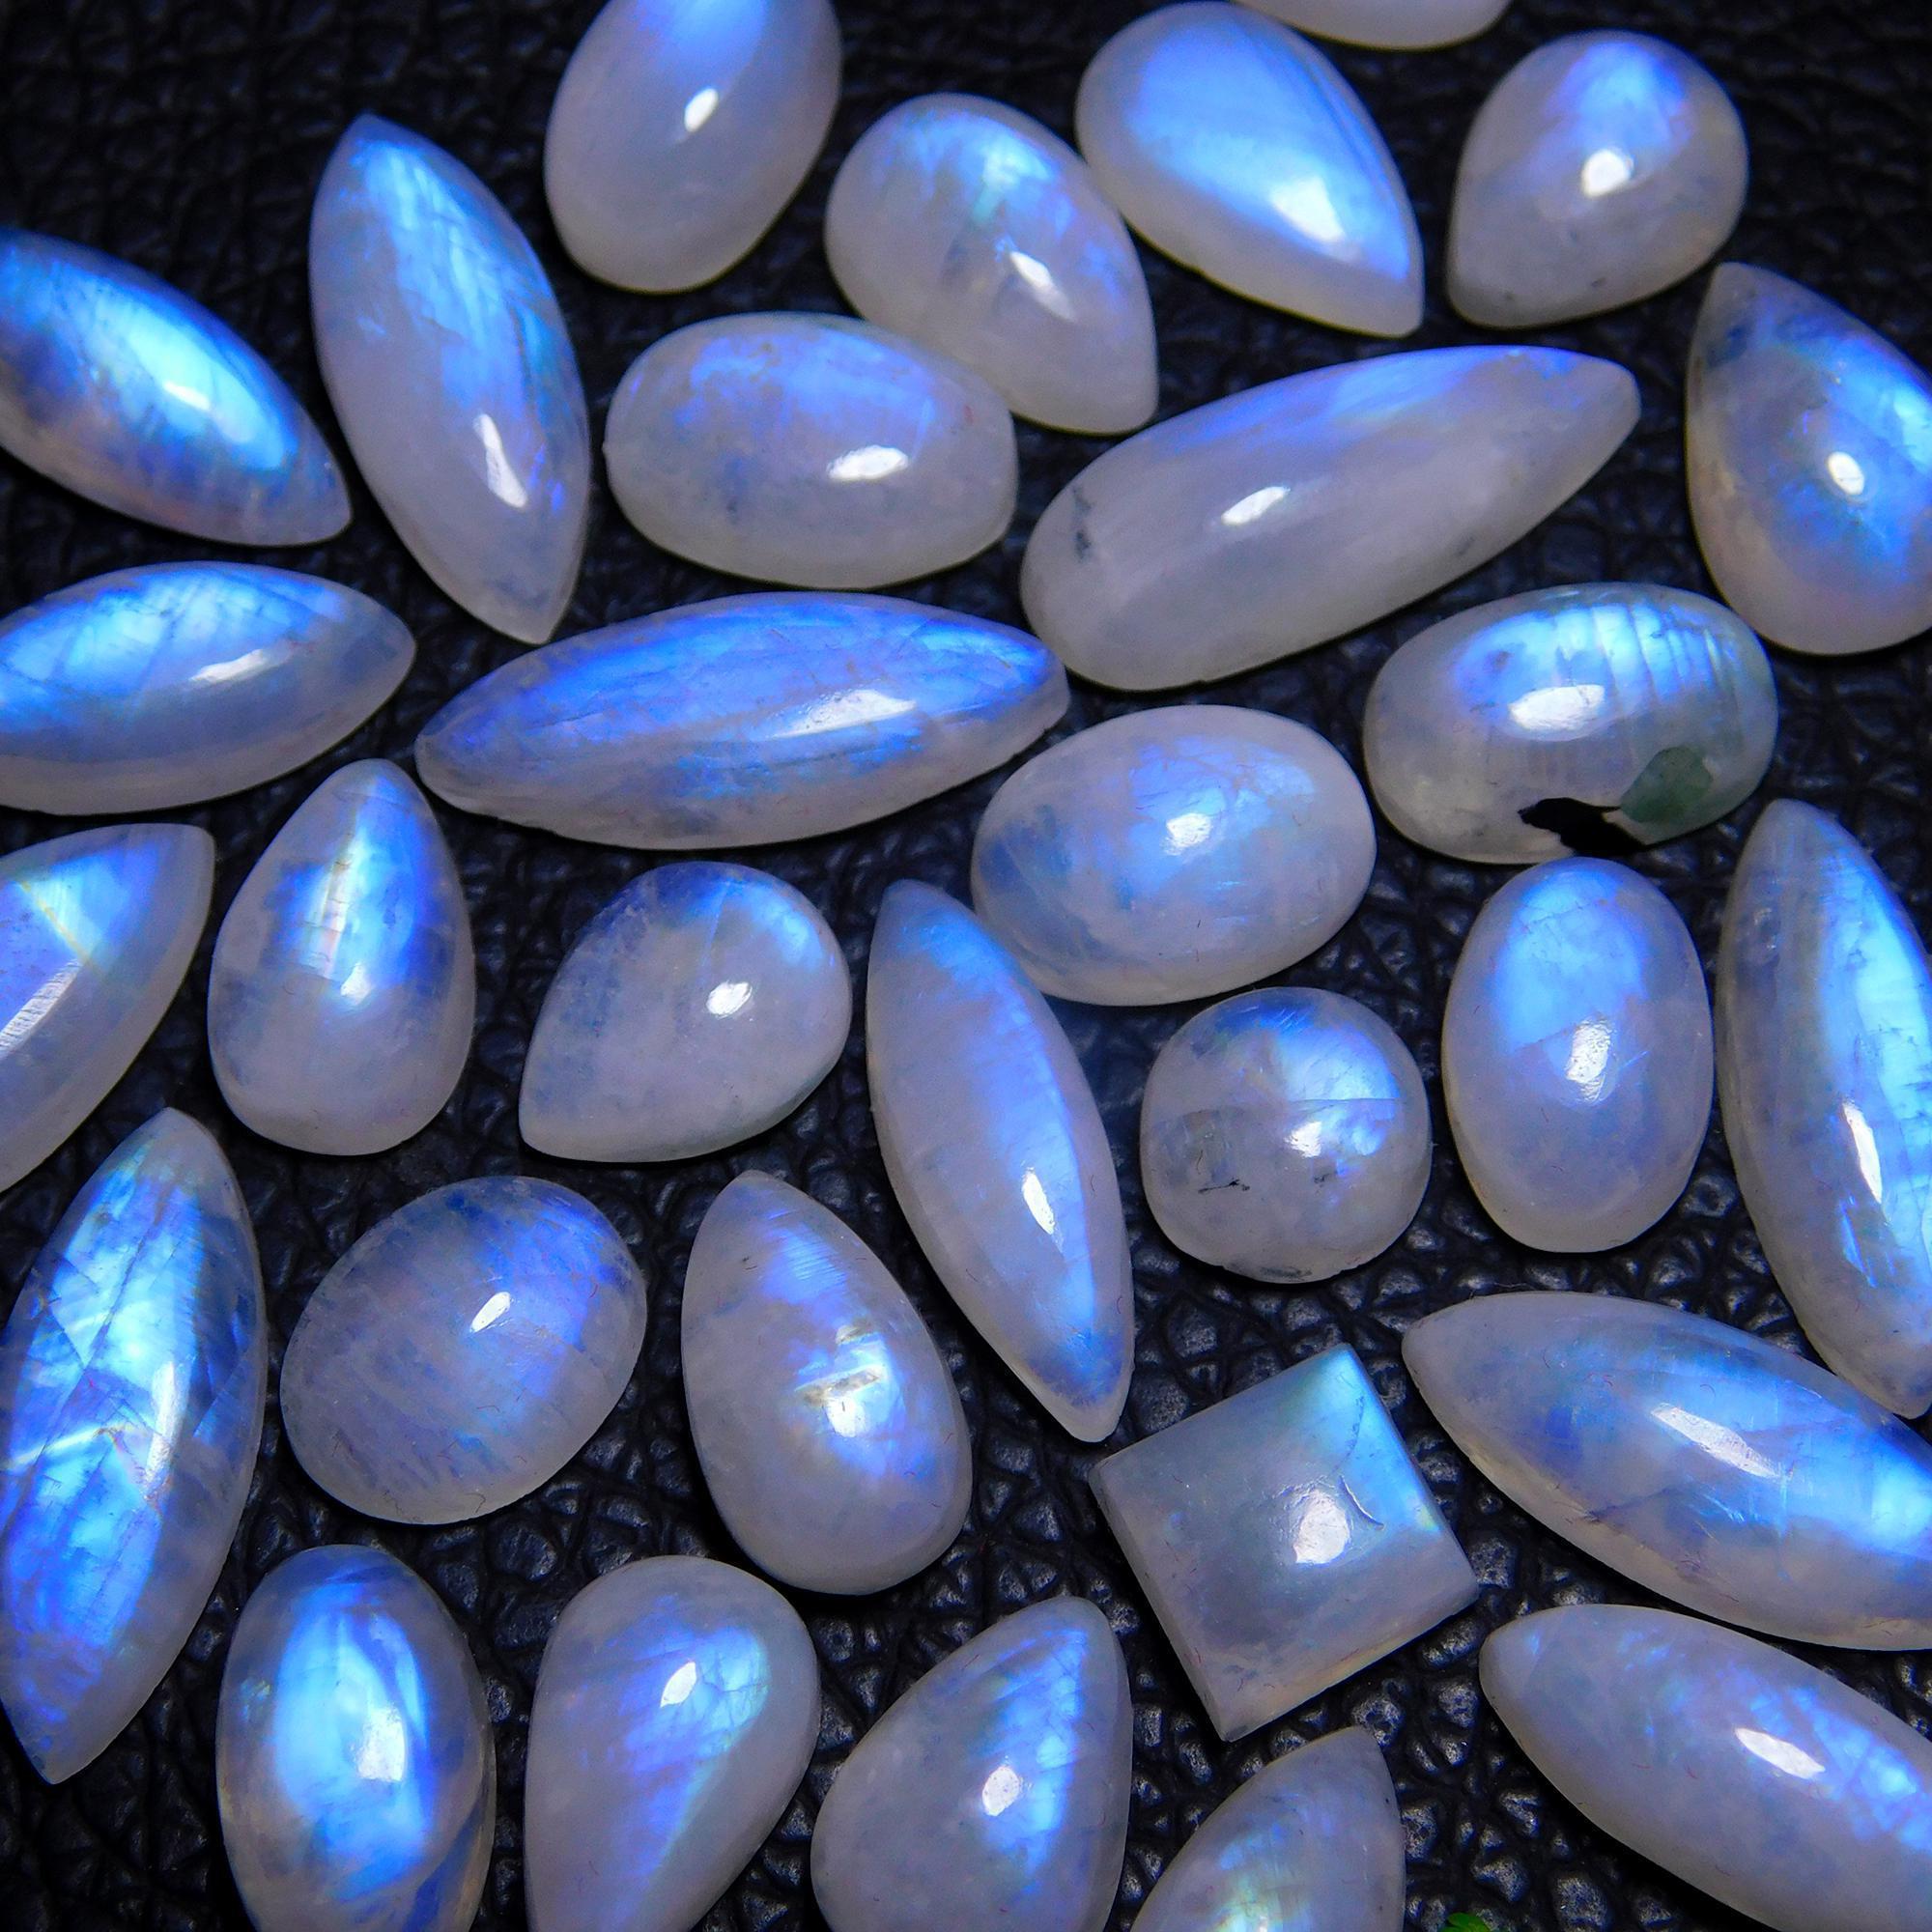 31Pcs 100Cts Natural Rainbow Moonstone Cabochon Blue Fire Loose Gemstone Crystal jewelry supplies wholesale lot gift for her Black Friday 18X7 8X8mm#9428